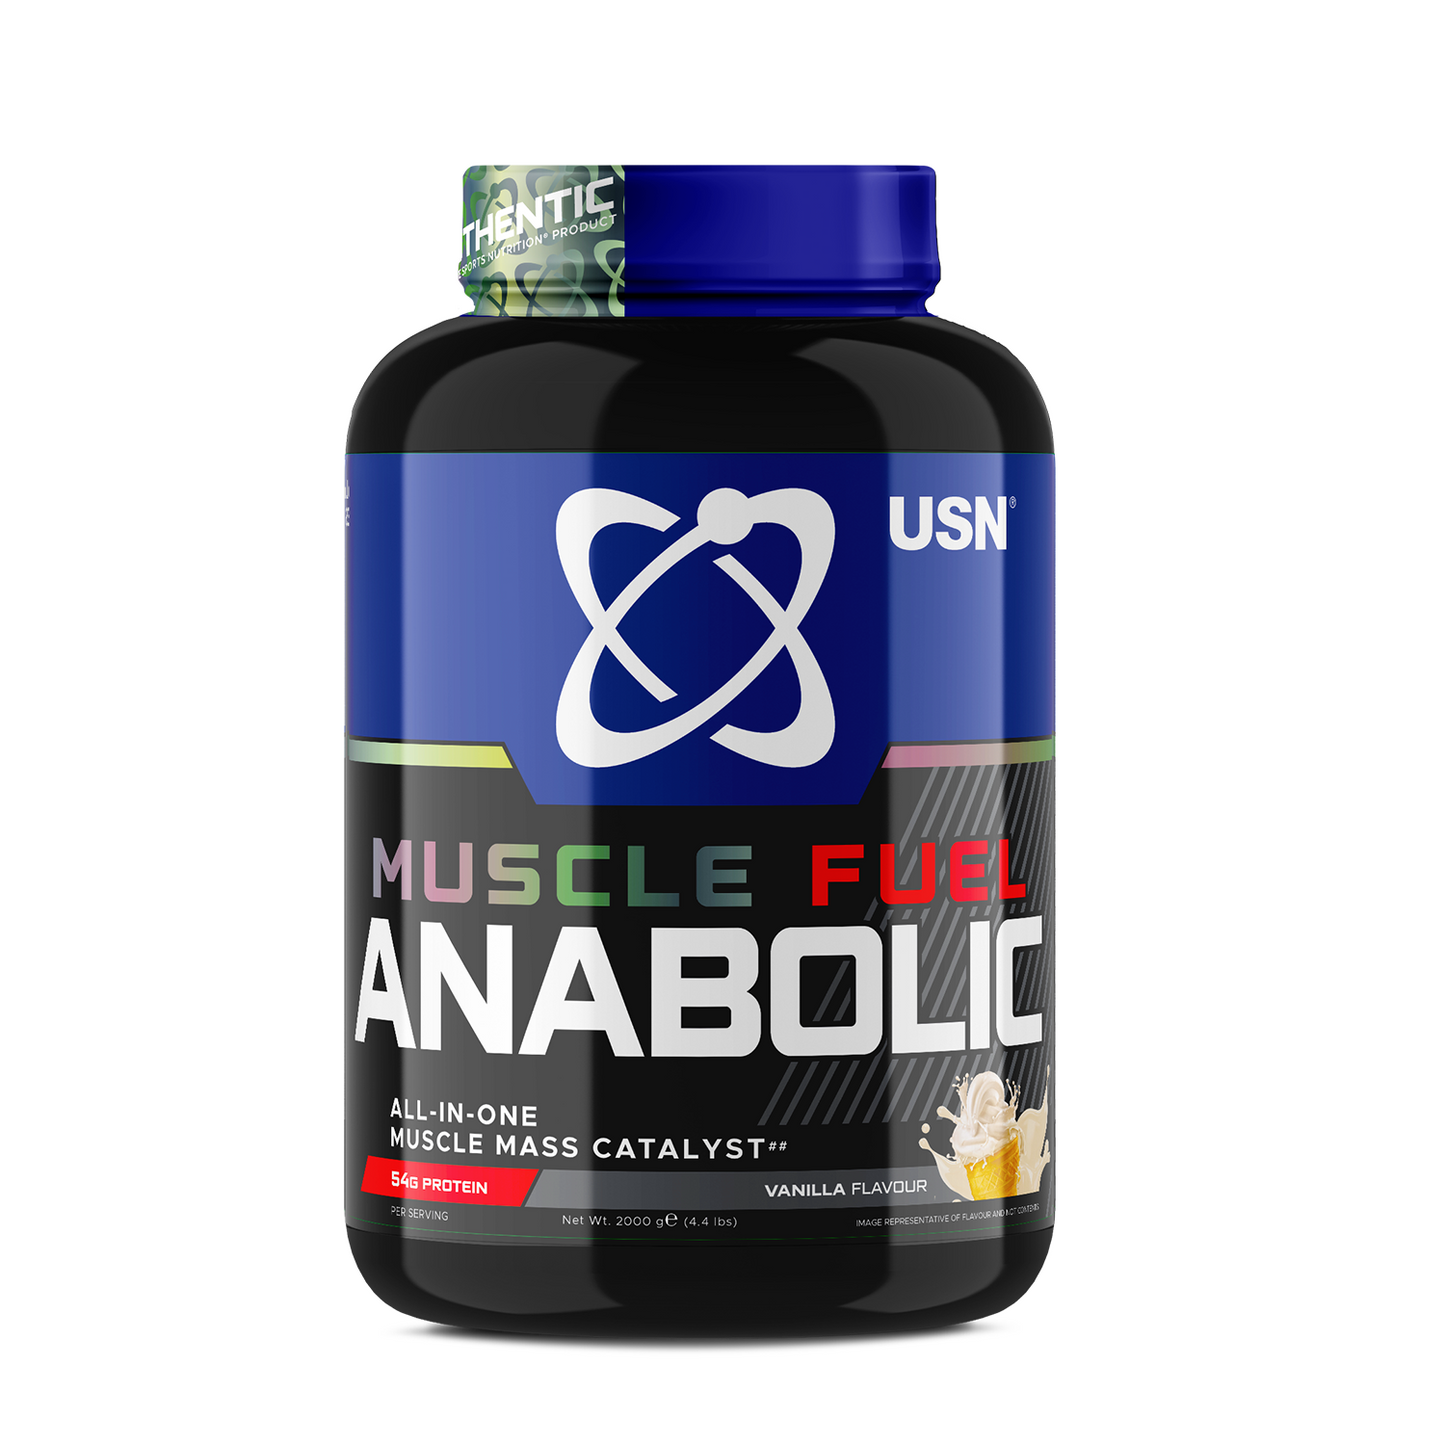 Muscle Fuel Anabolic - All-In-One Gain Protein Powder